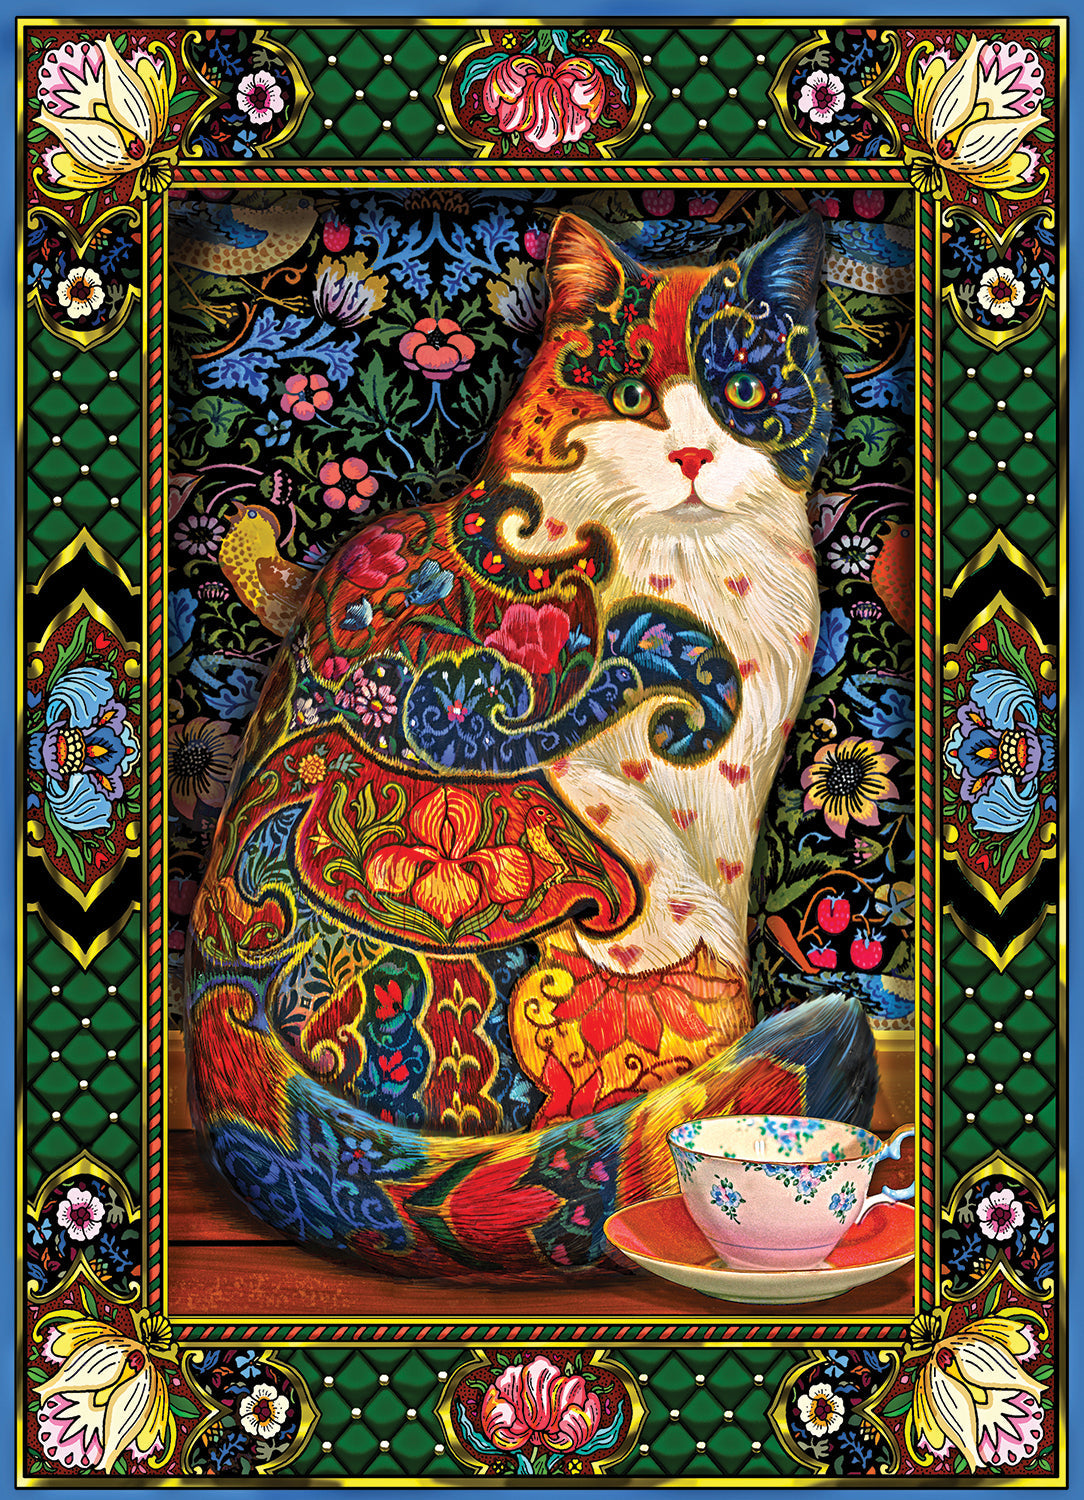 Painted Cat 1000 Piece - Jigsaw Puzzle